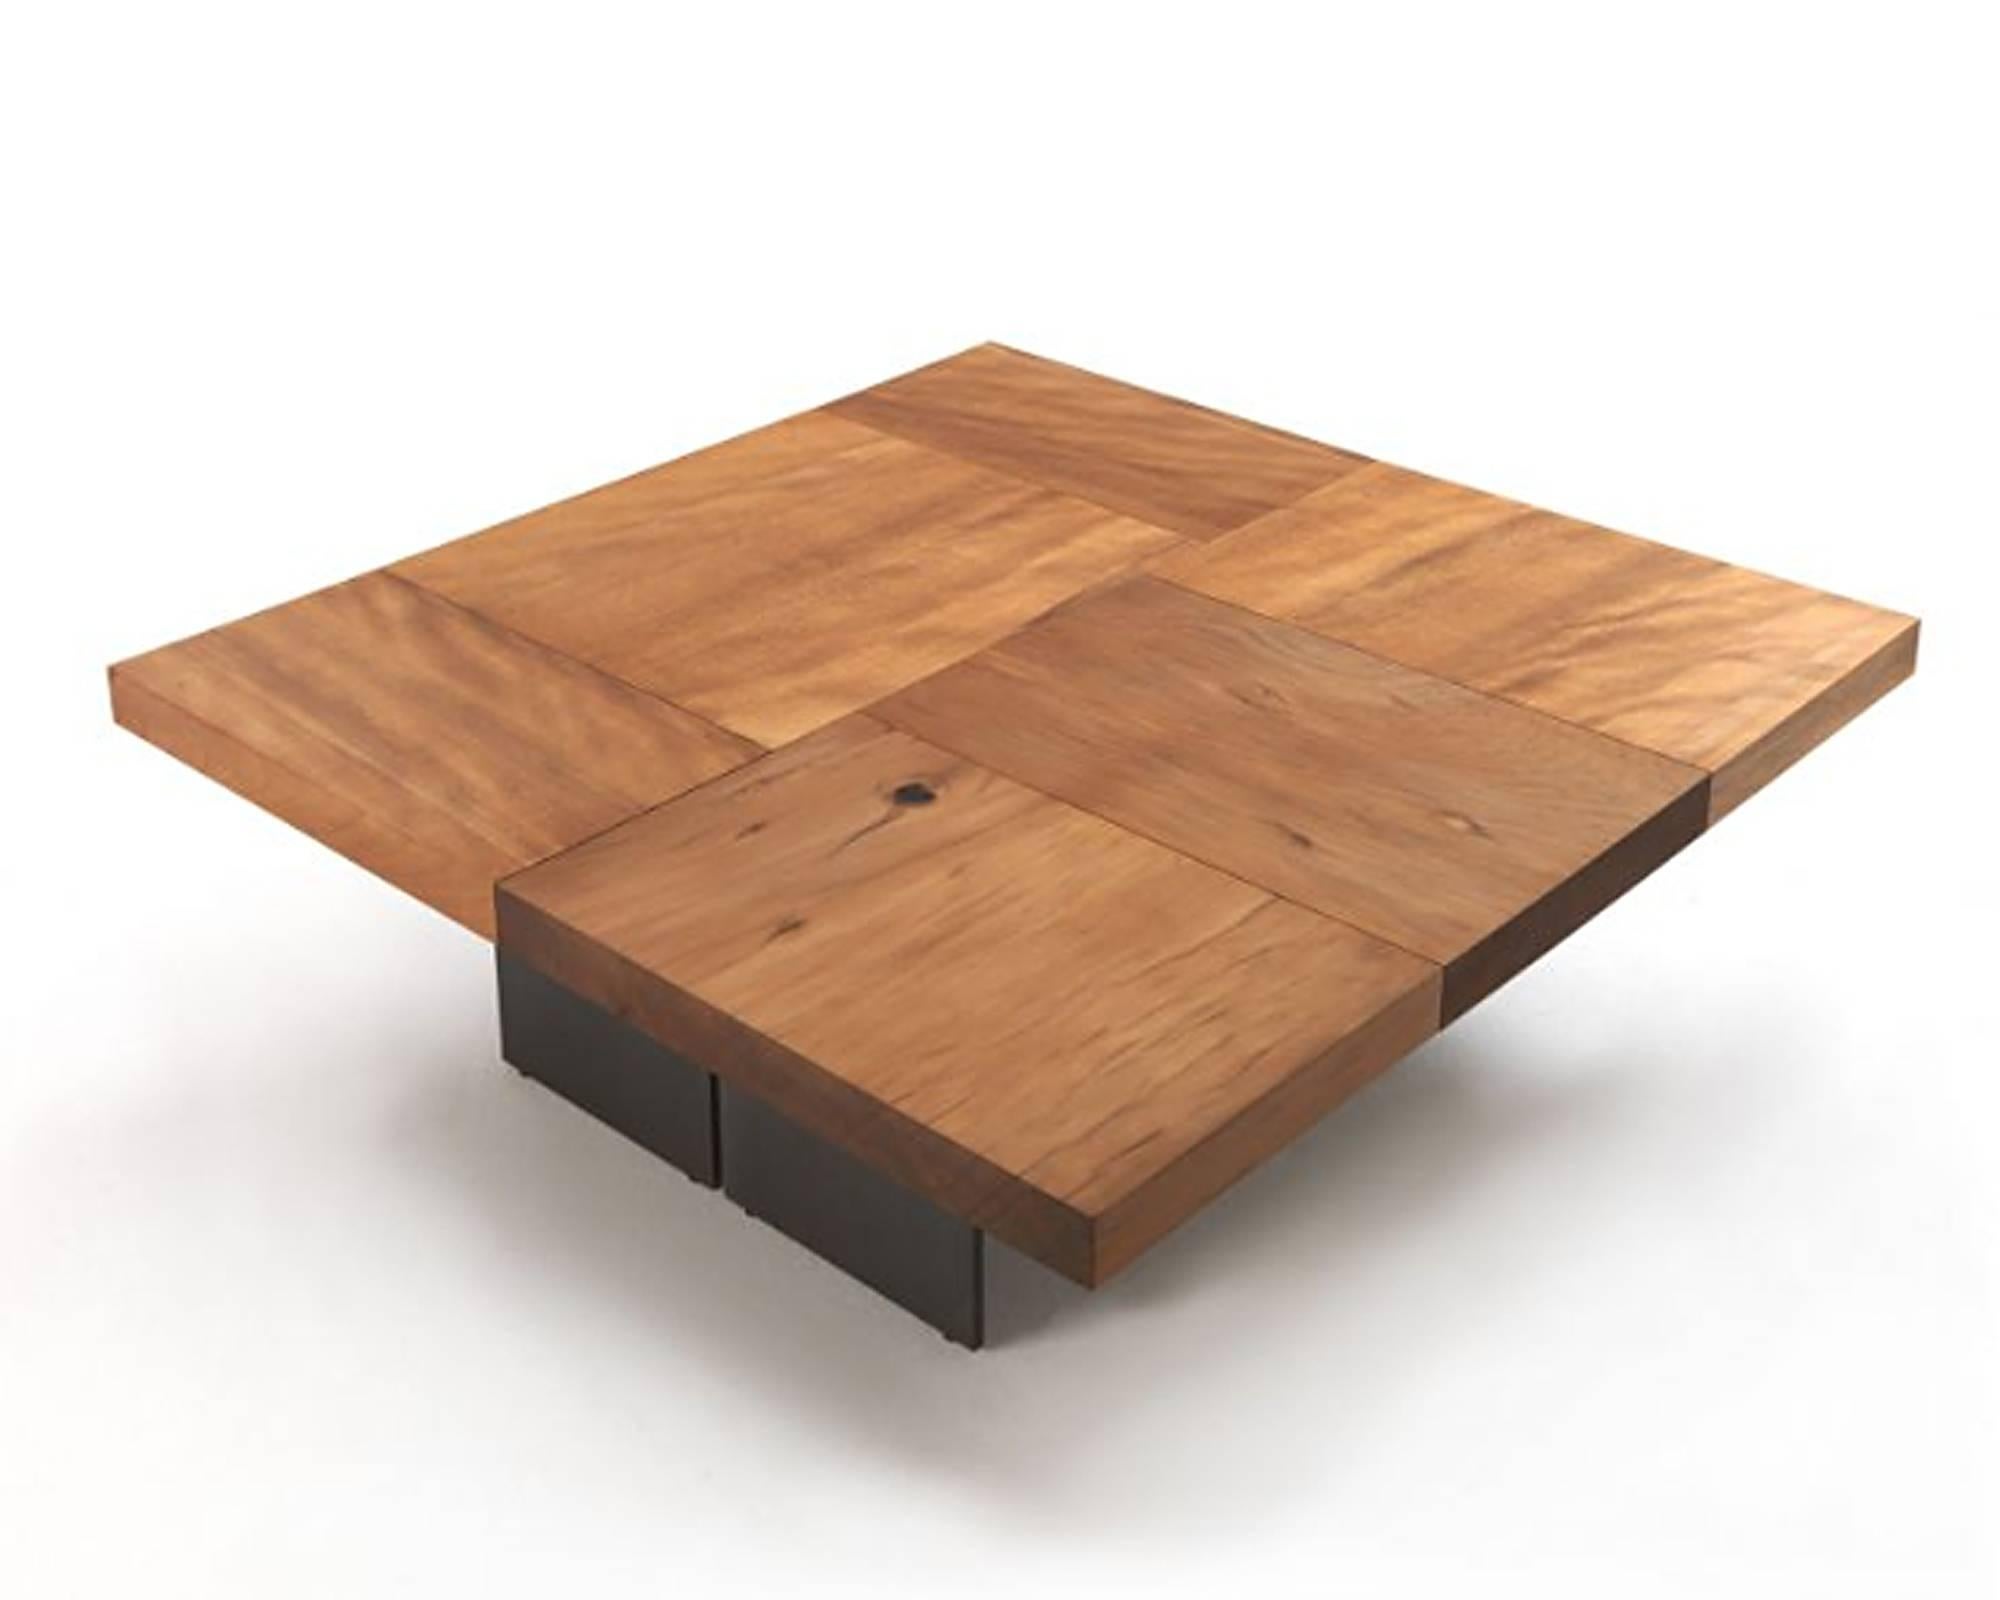 Coffee table Kauri wood in hand-crafted solid natural
kauri wood. High quality treated wood with base in
natural raw iron. Elegant wooden piece.
Available on request in:
L100xD100xH40cm, price: 9900,00€.
L120xD90xH40cm, price: